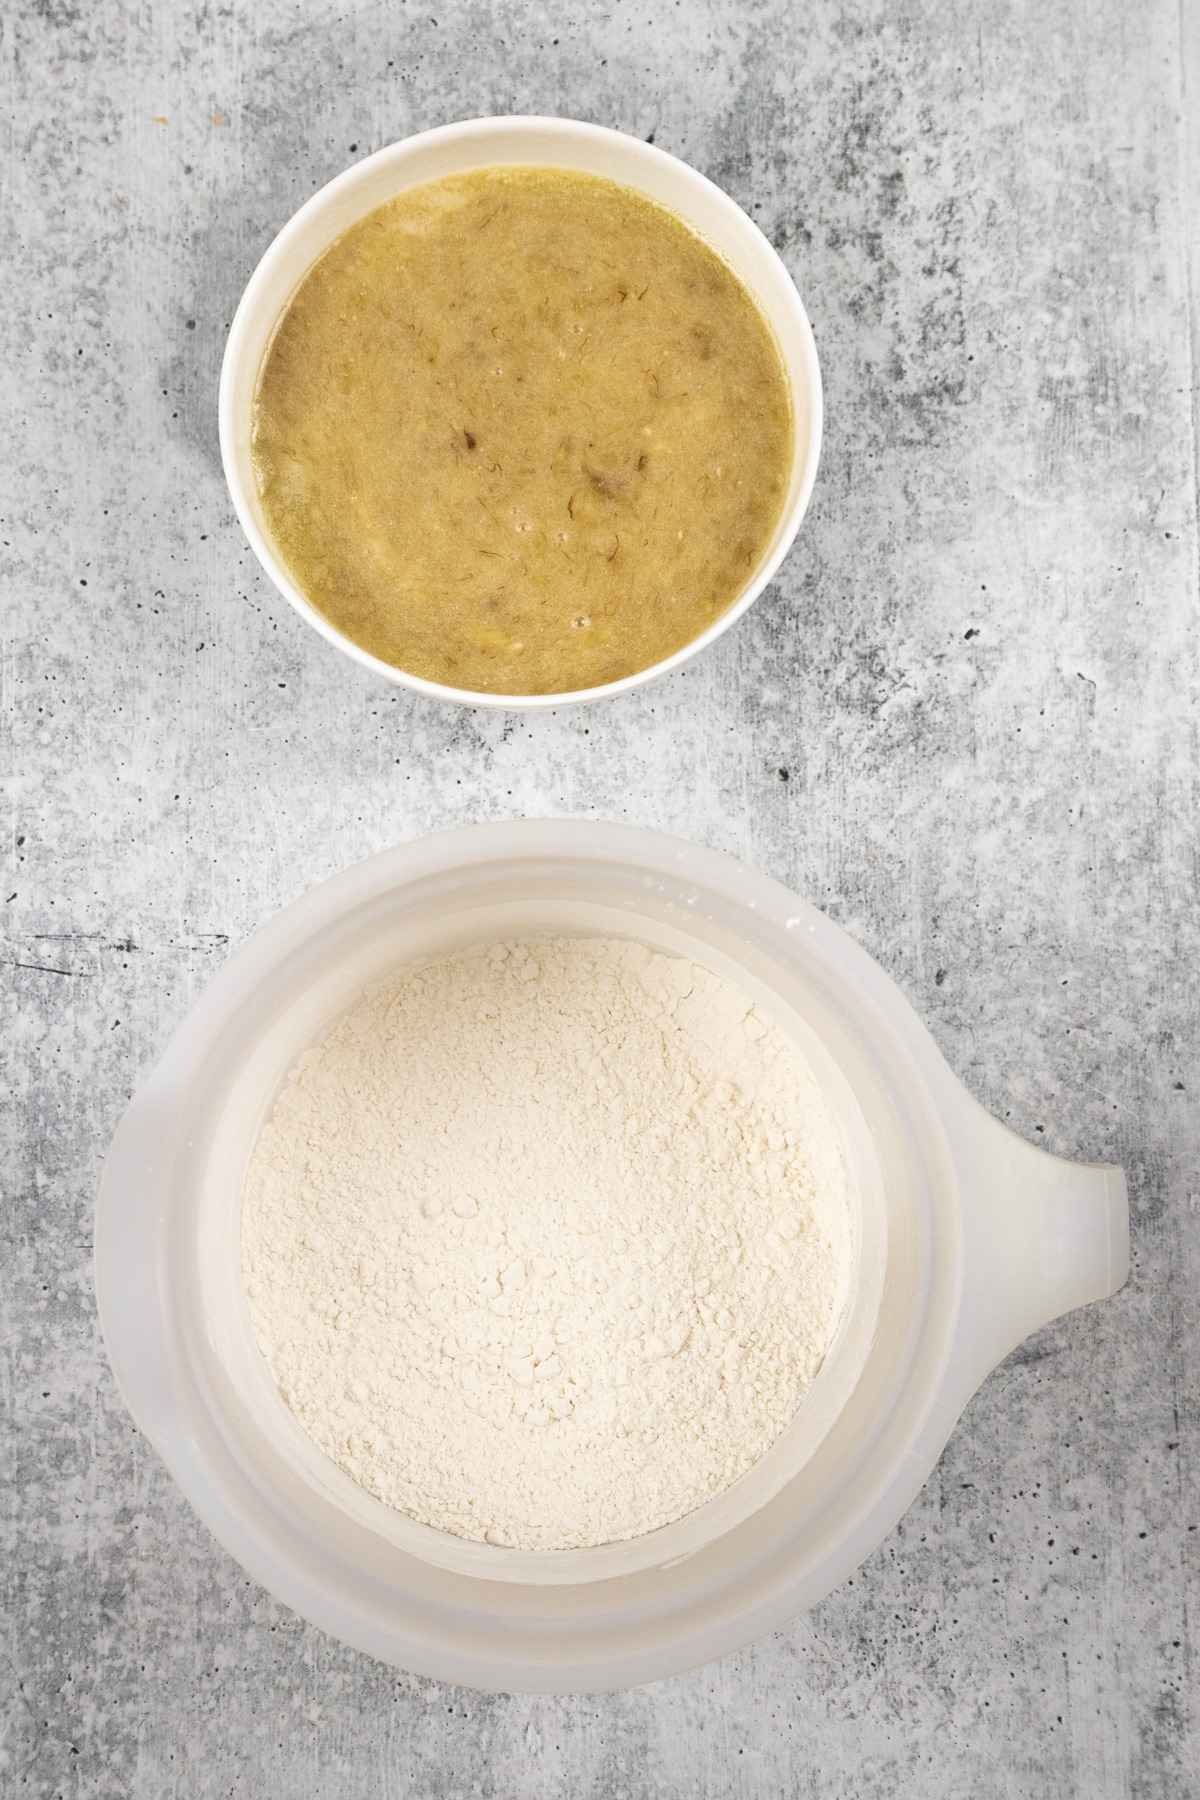 Banana mixture and flour mixture in separate bowls.